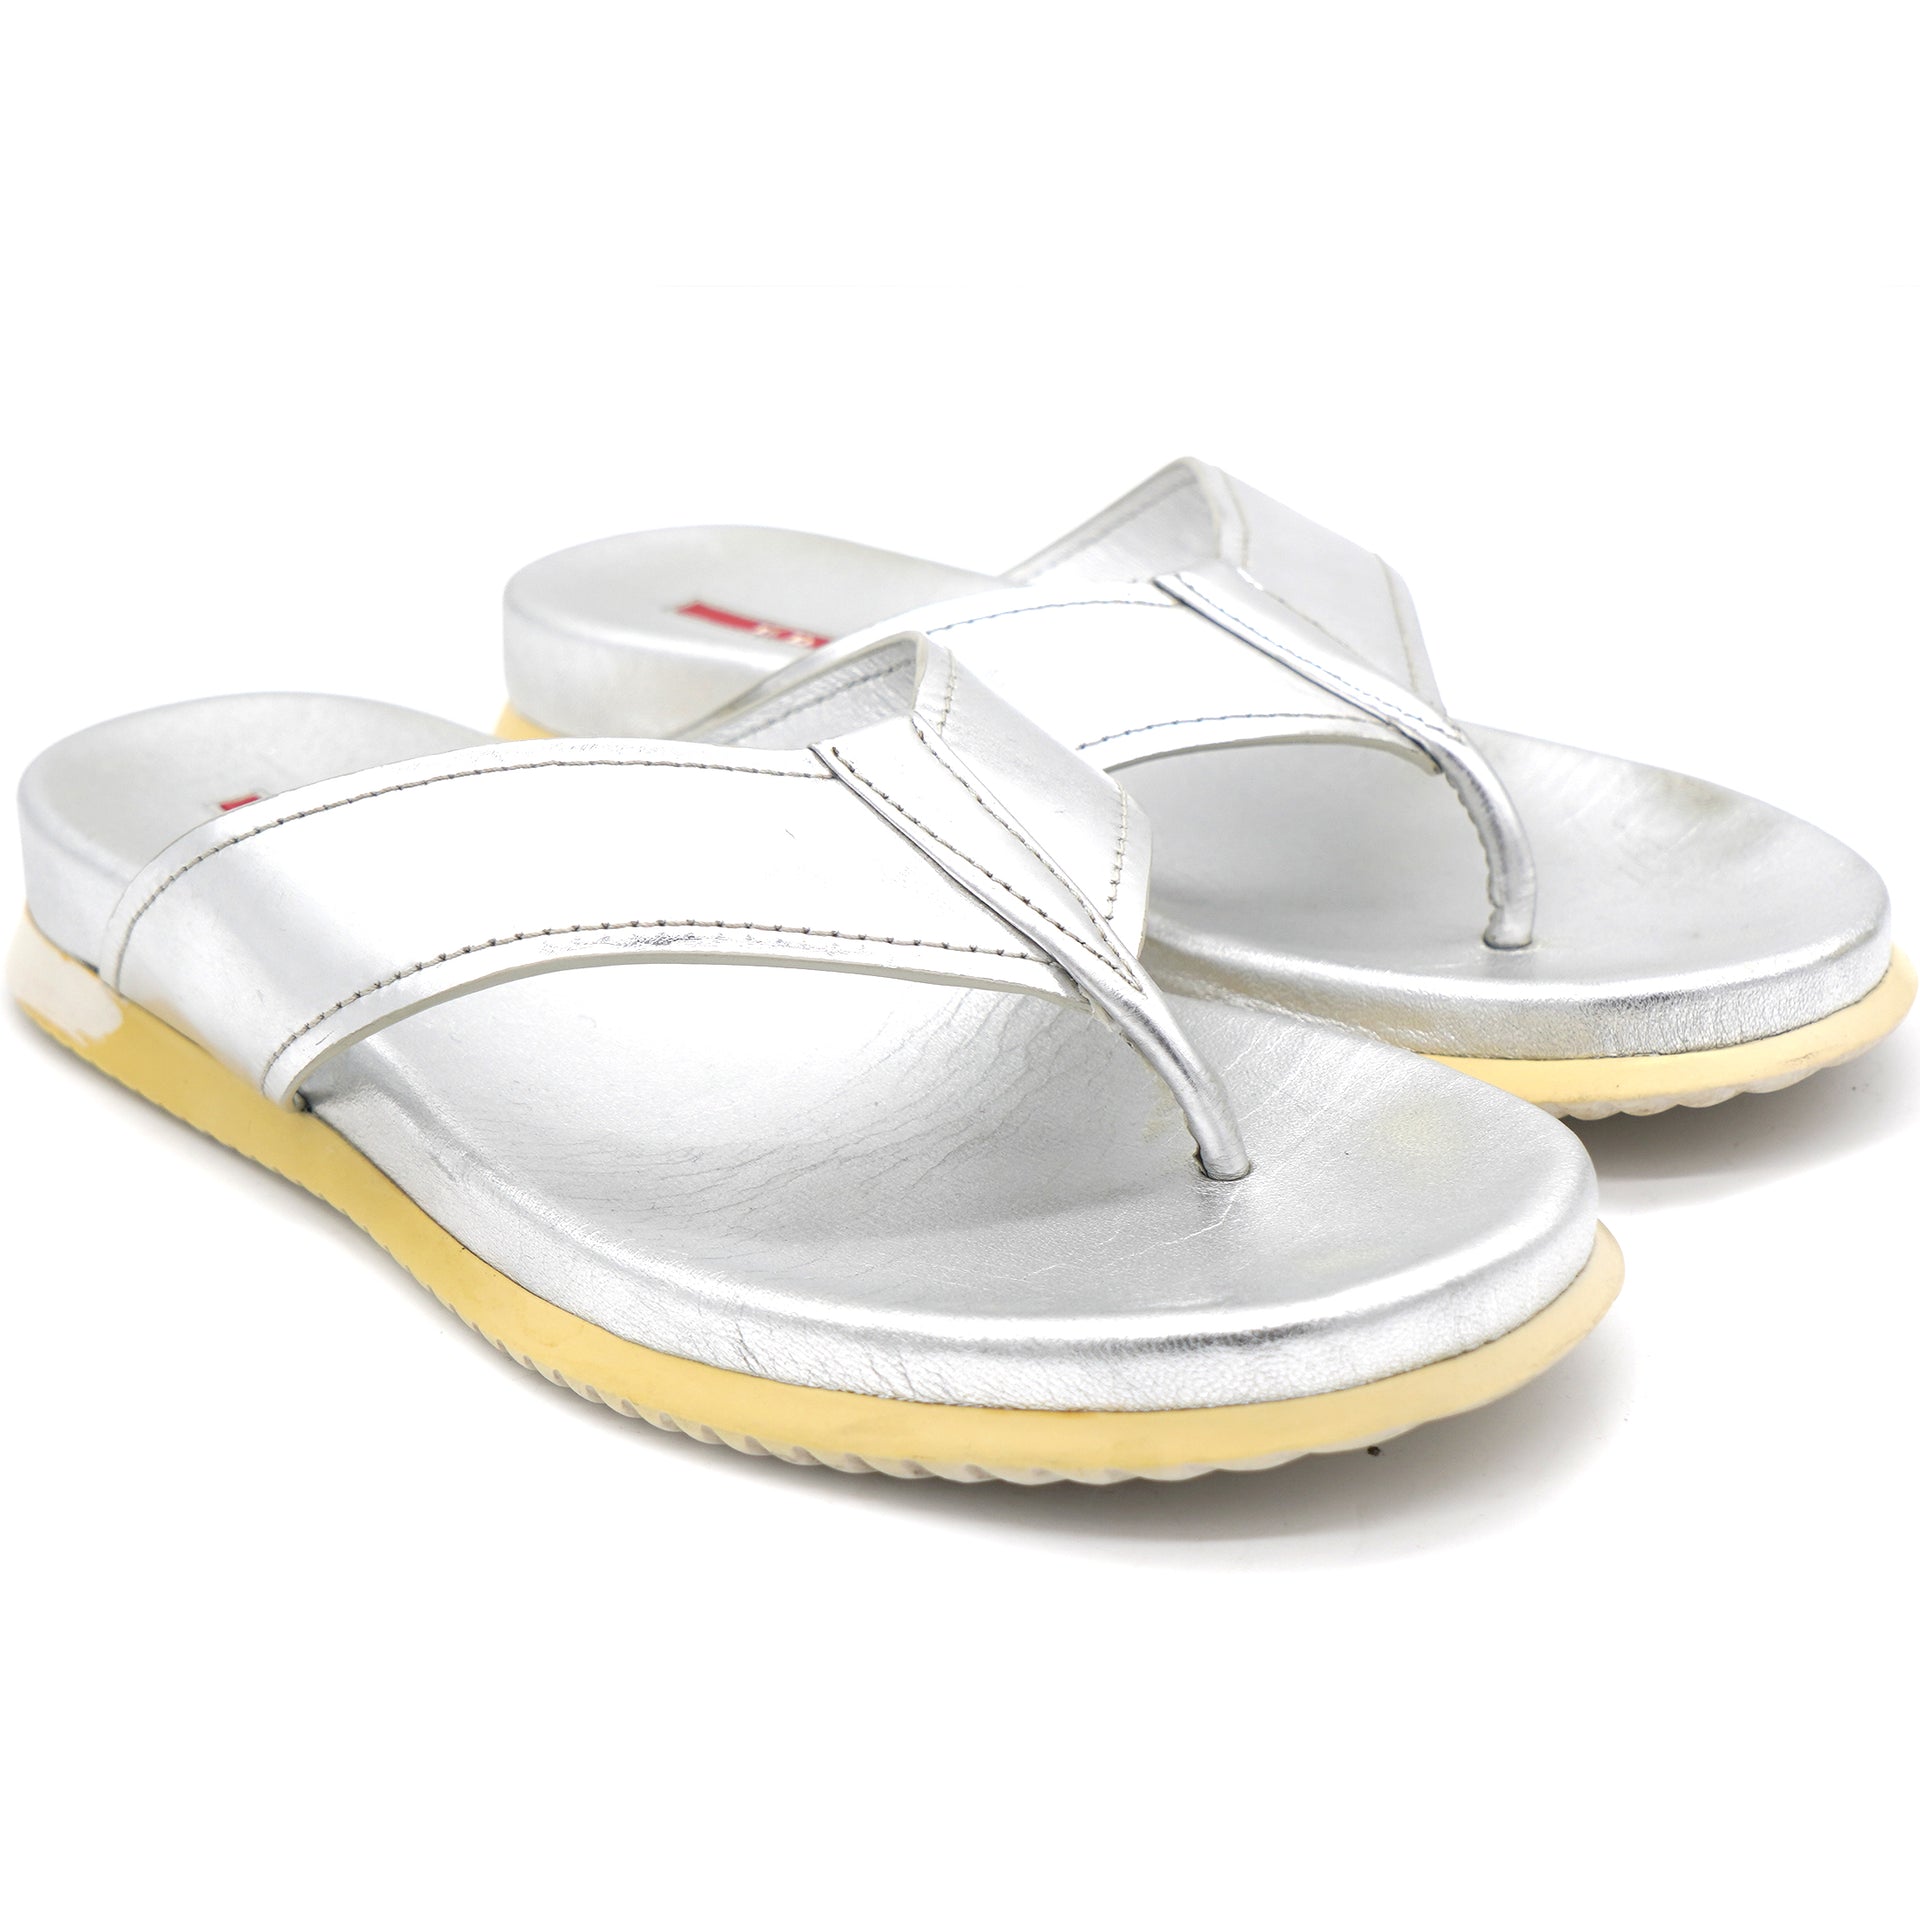 Metallic Silver Leather Flat Thong Sandals 36